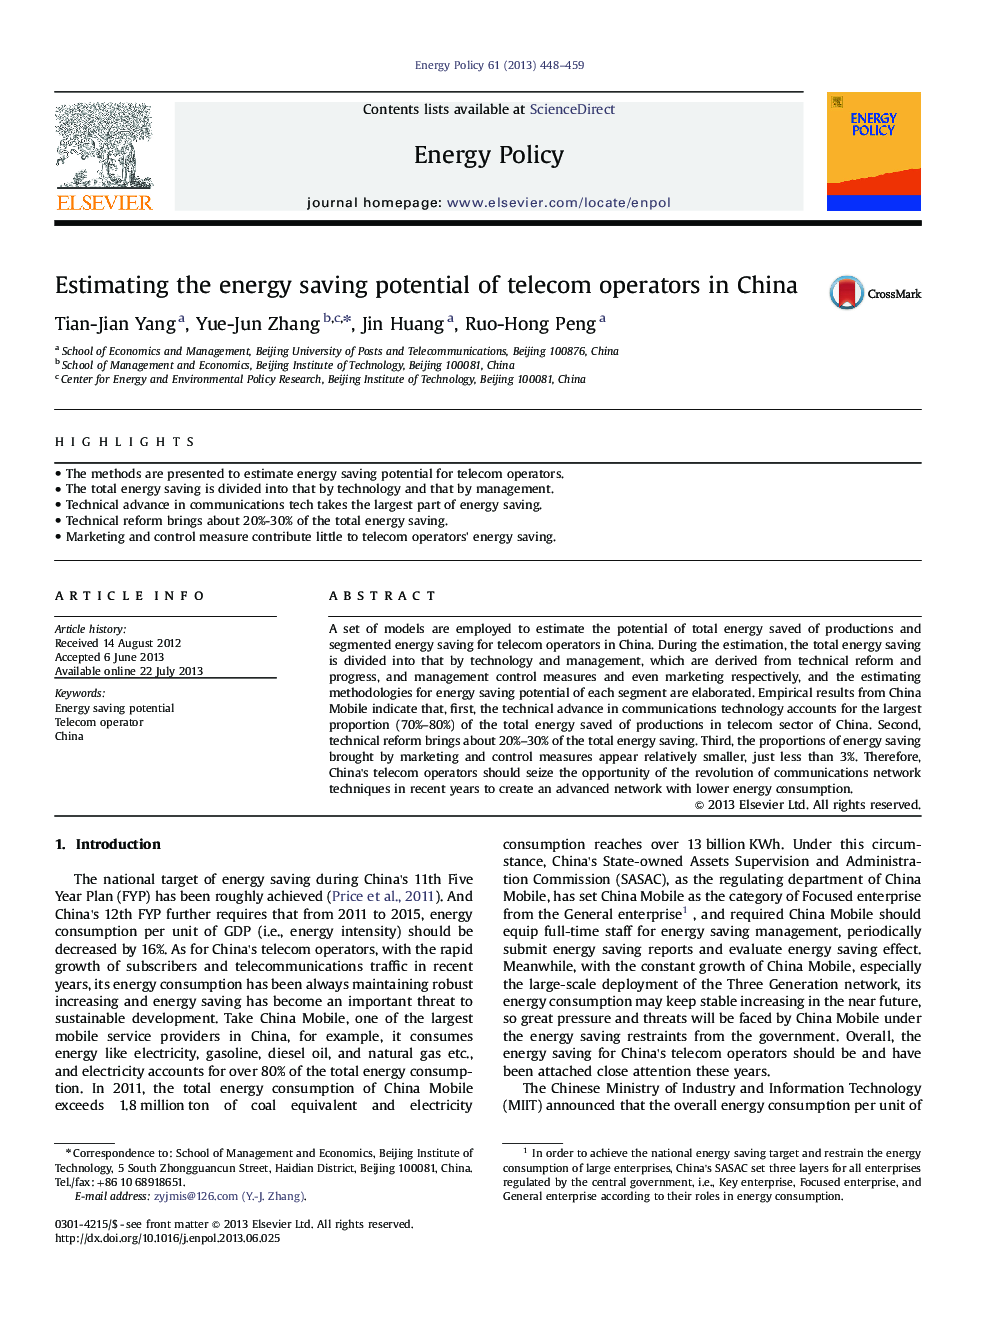 Estimating the energy saving potential of telecom operators in China